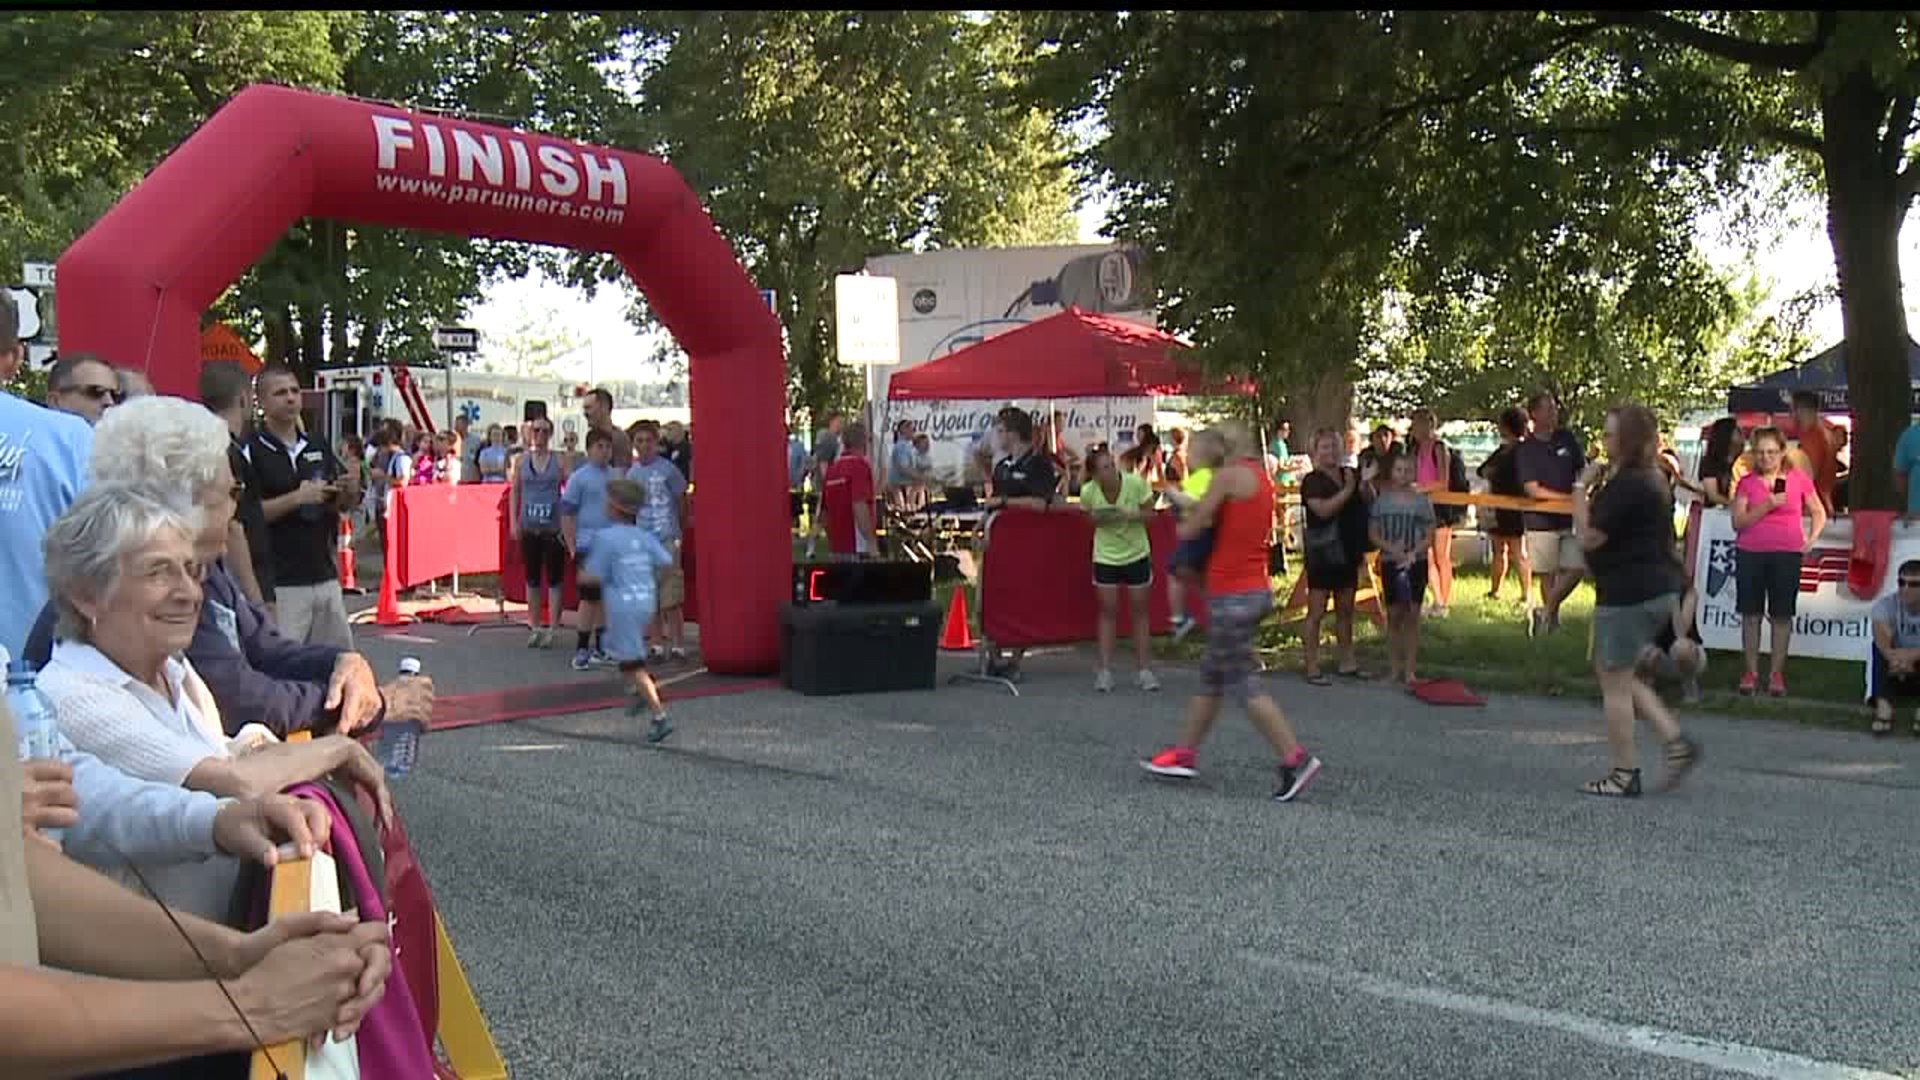 More than 1,500 runners expected to race in annual Harrisburg Mile